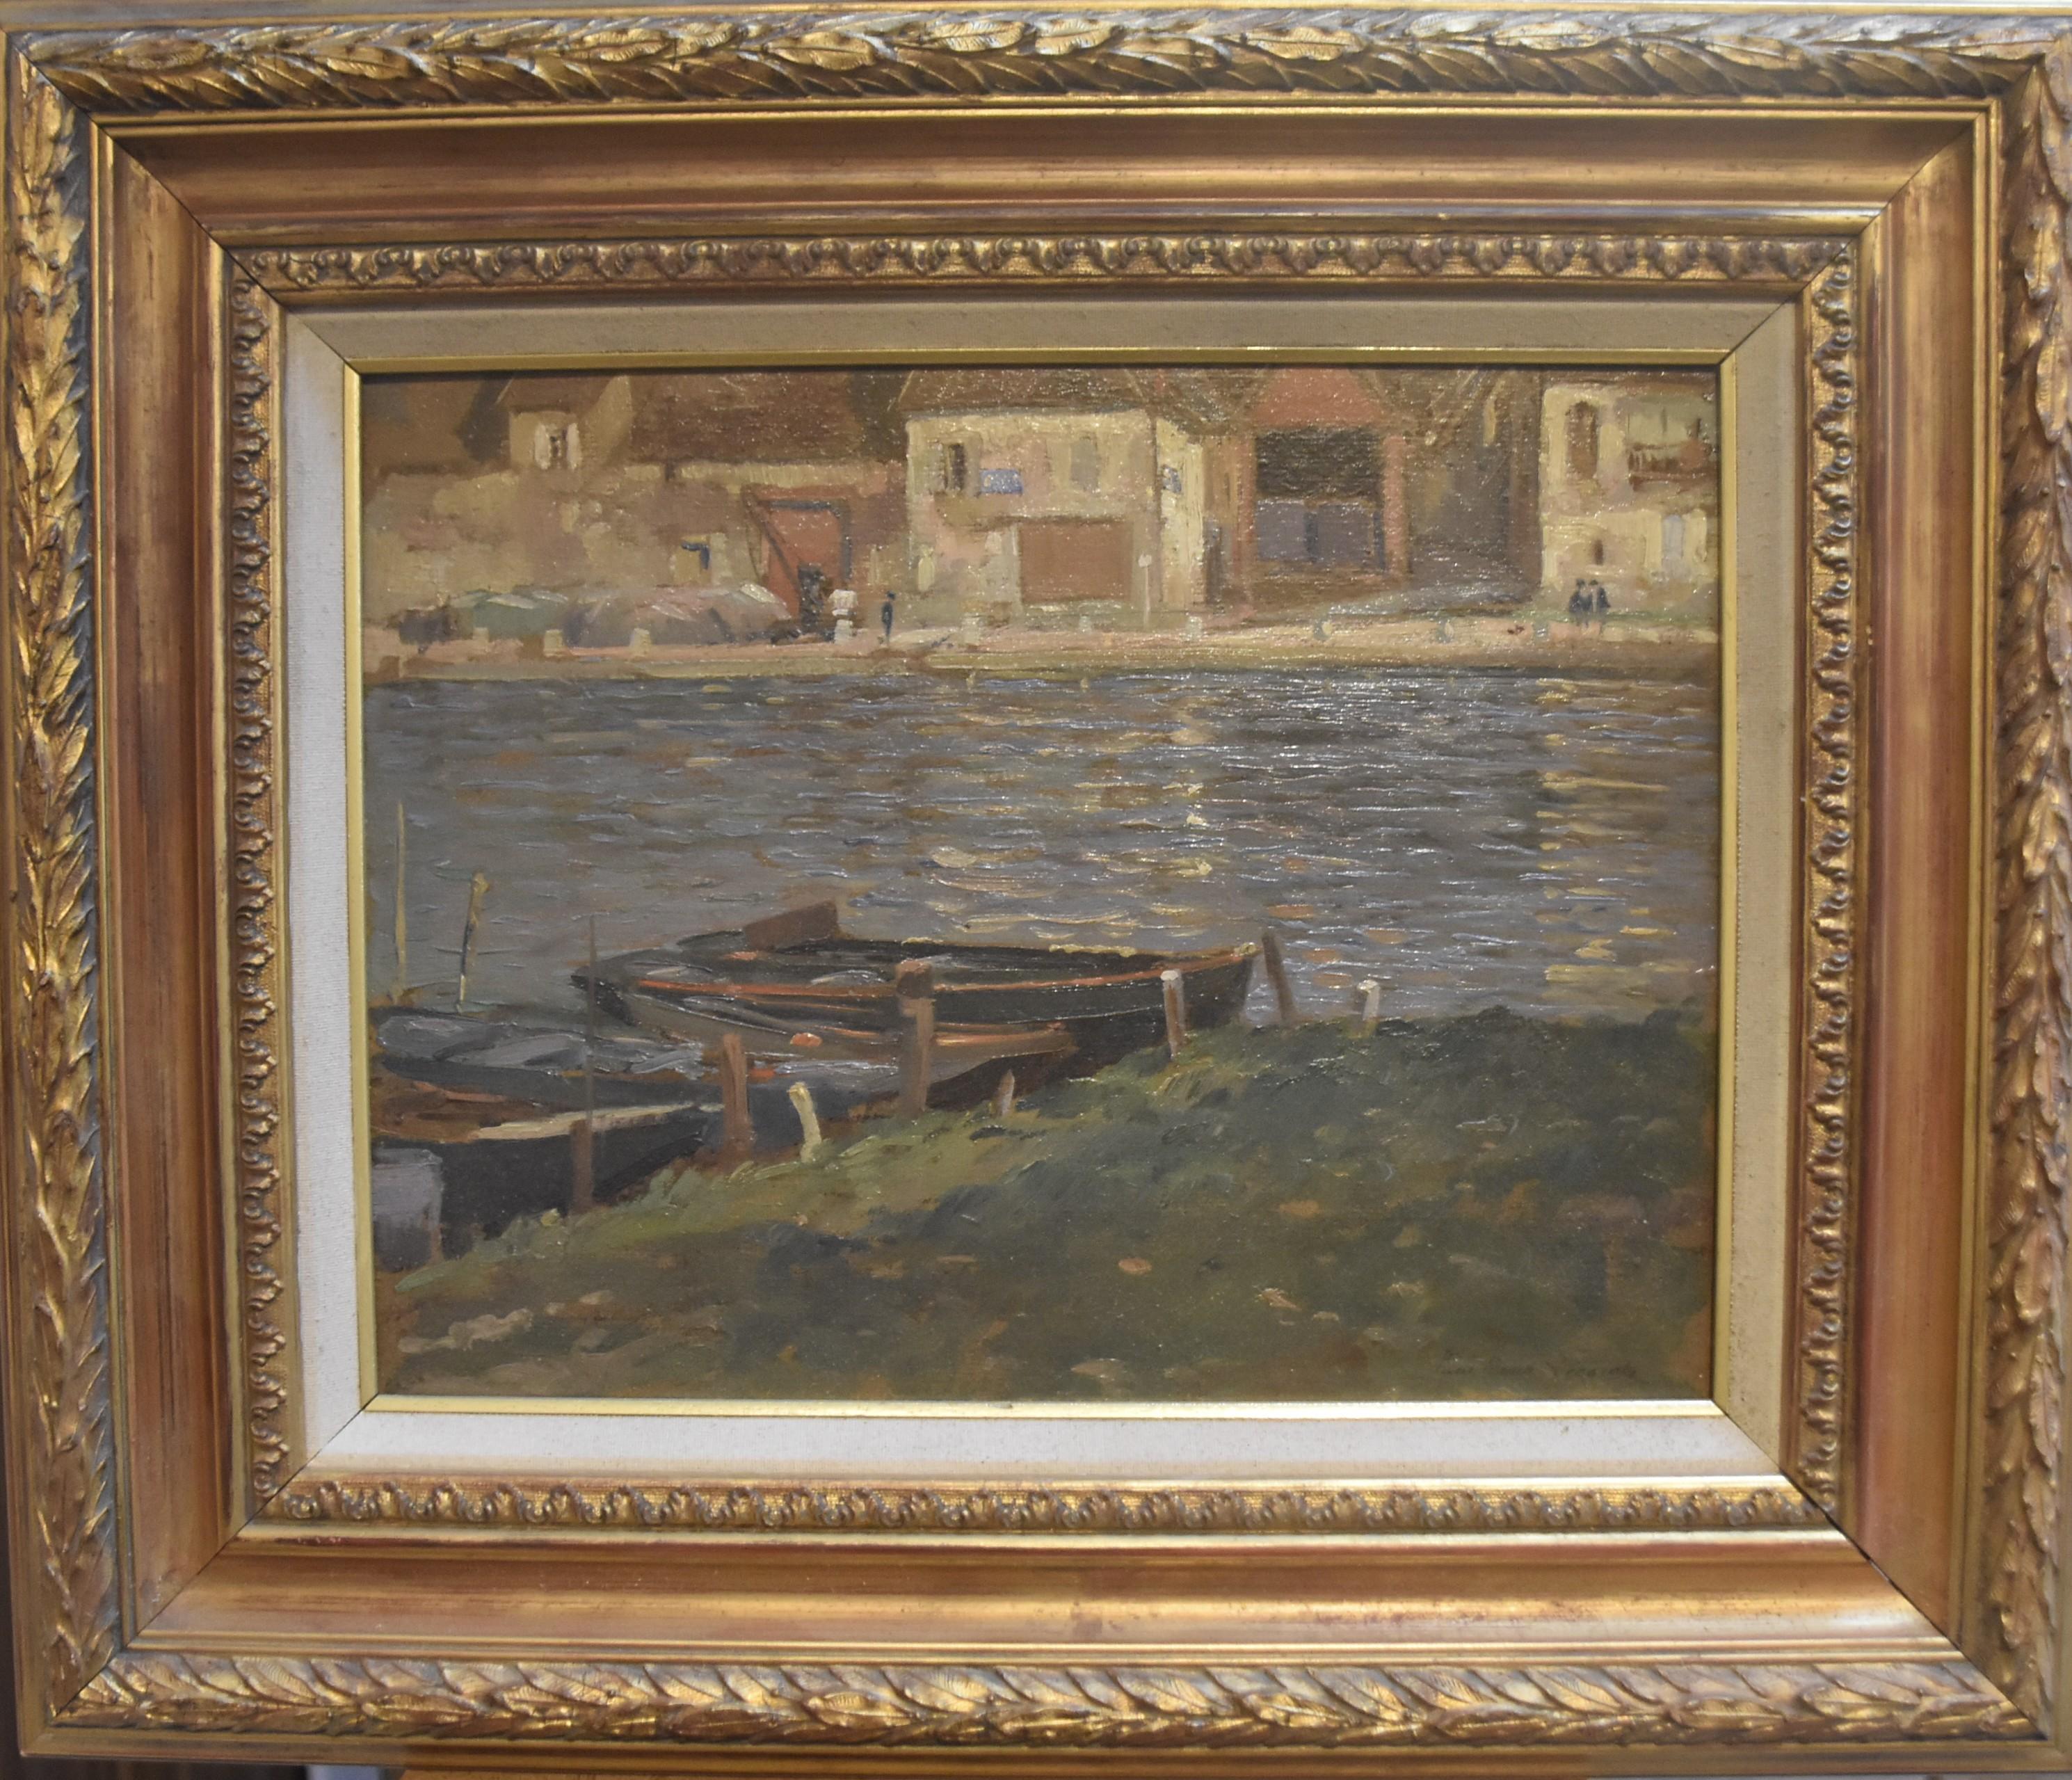 Paul Emile Lecomte (1877-1950)
A River
Signed on the lower right
Oil on cardboard panel
25 x 33  cm 
In good condition
Framed  44.5 x 52.5 cm 

This beautiful painting by Paul-Emile Lecomte is characterised by the modernity of its composition, the